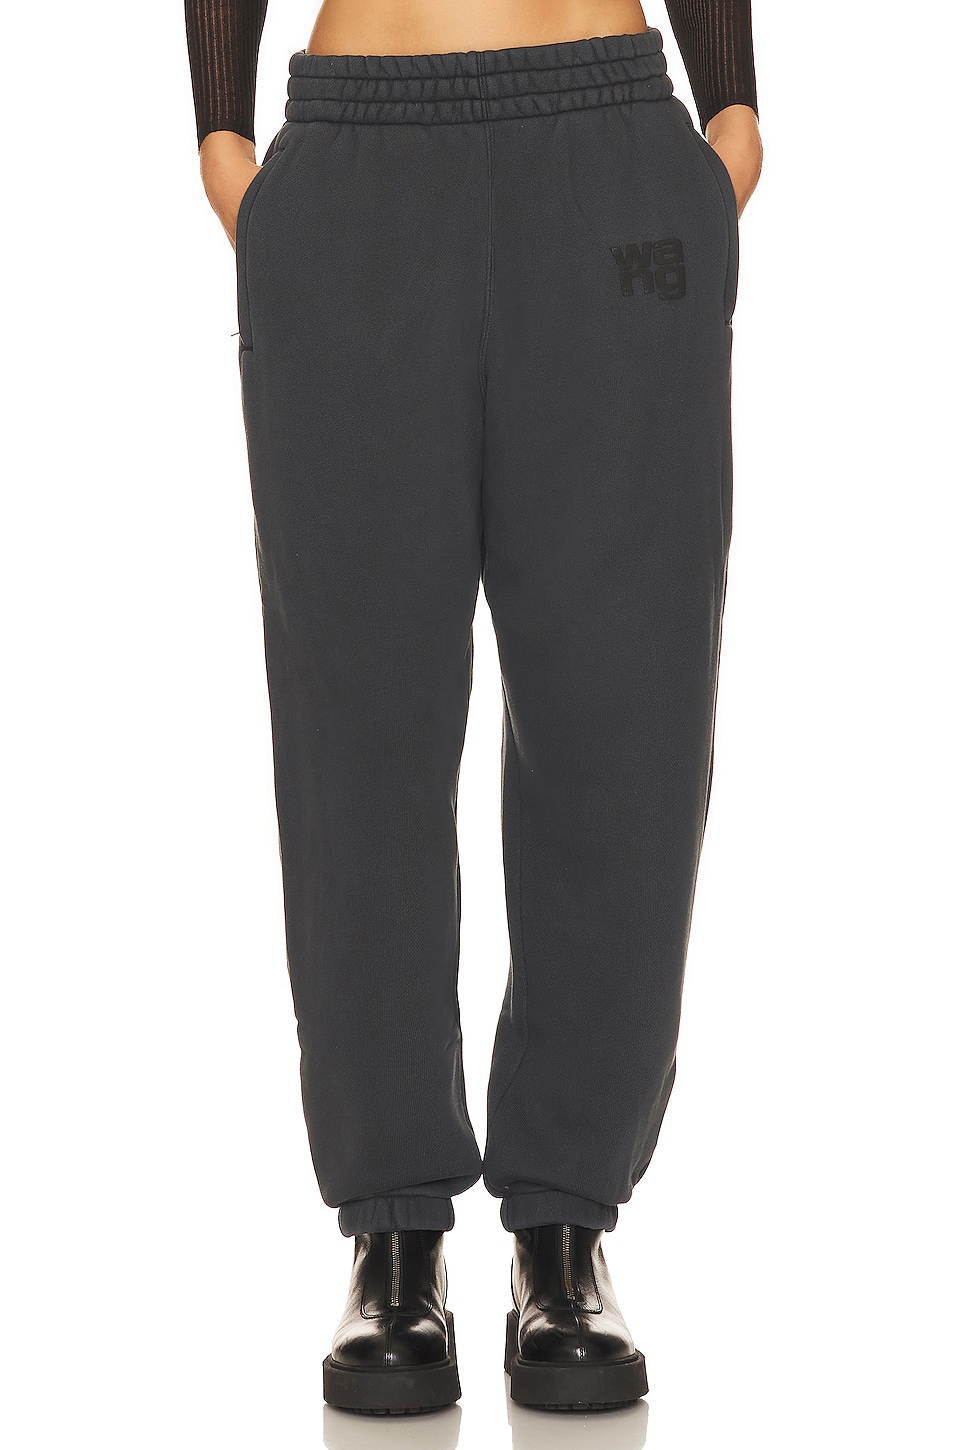 Alexander Wang Essential Sweatpant in Soft Obsidian